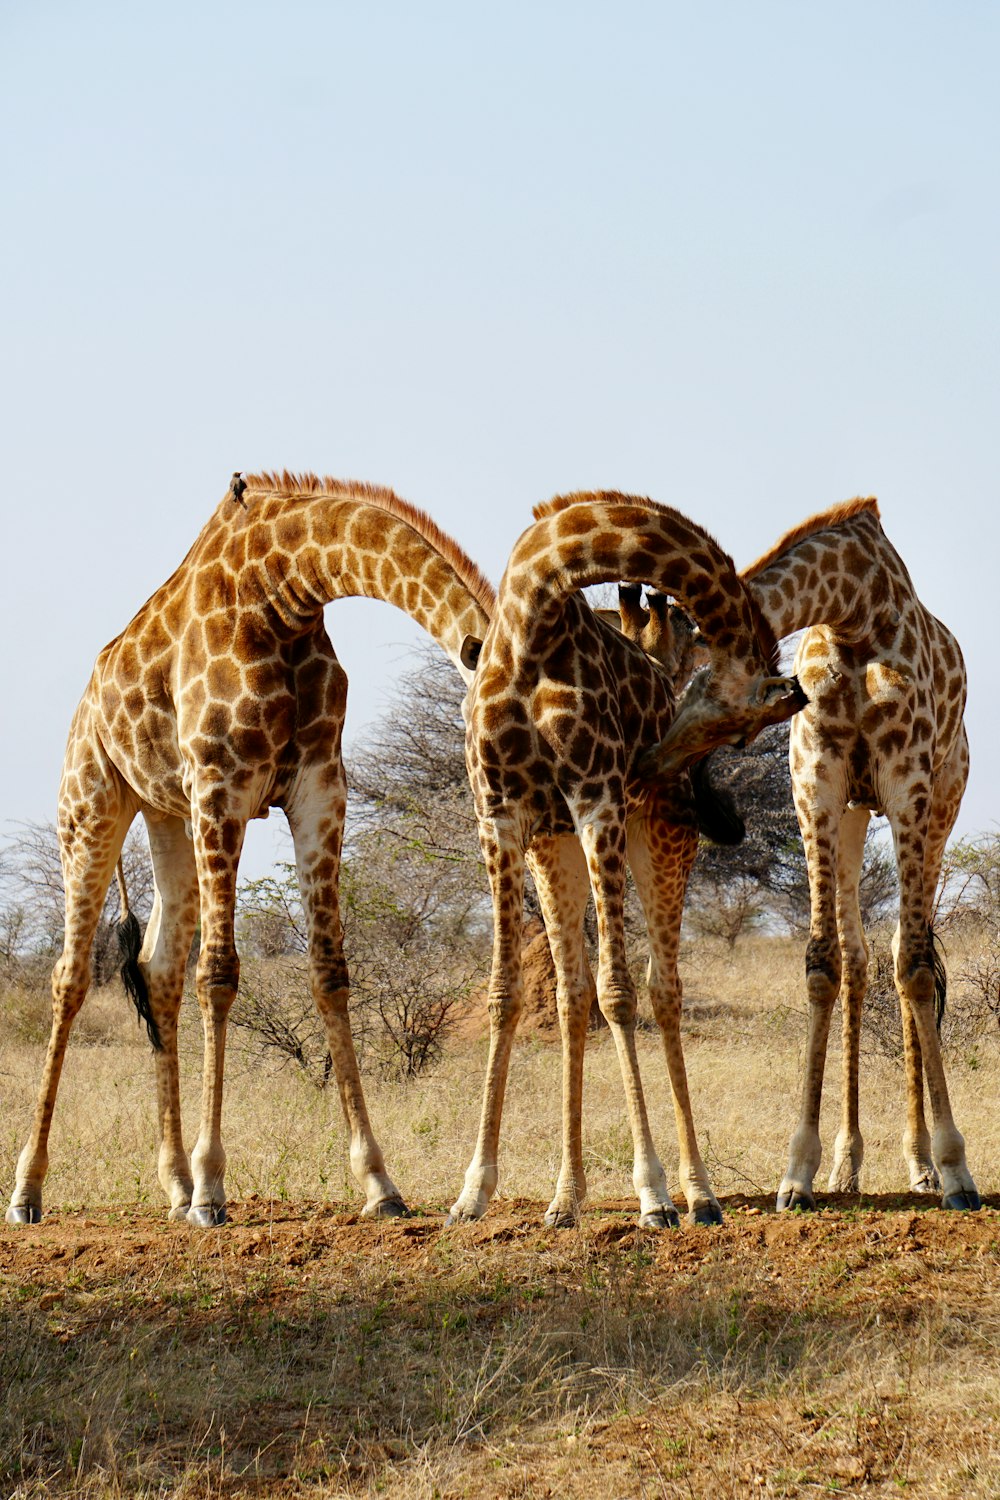 a group of giraffe standing next to each other on a dry grass field